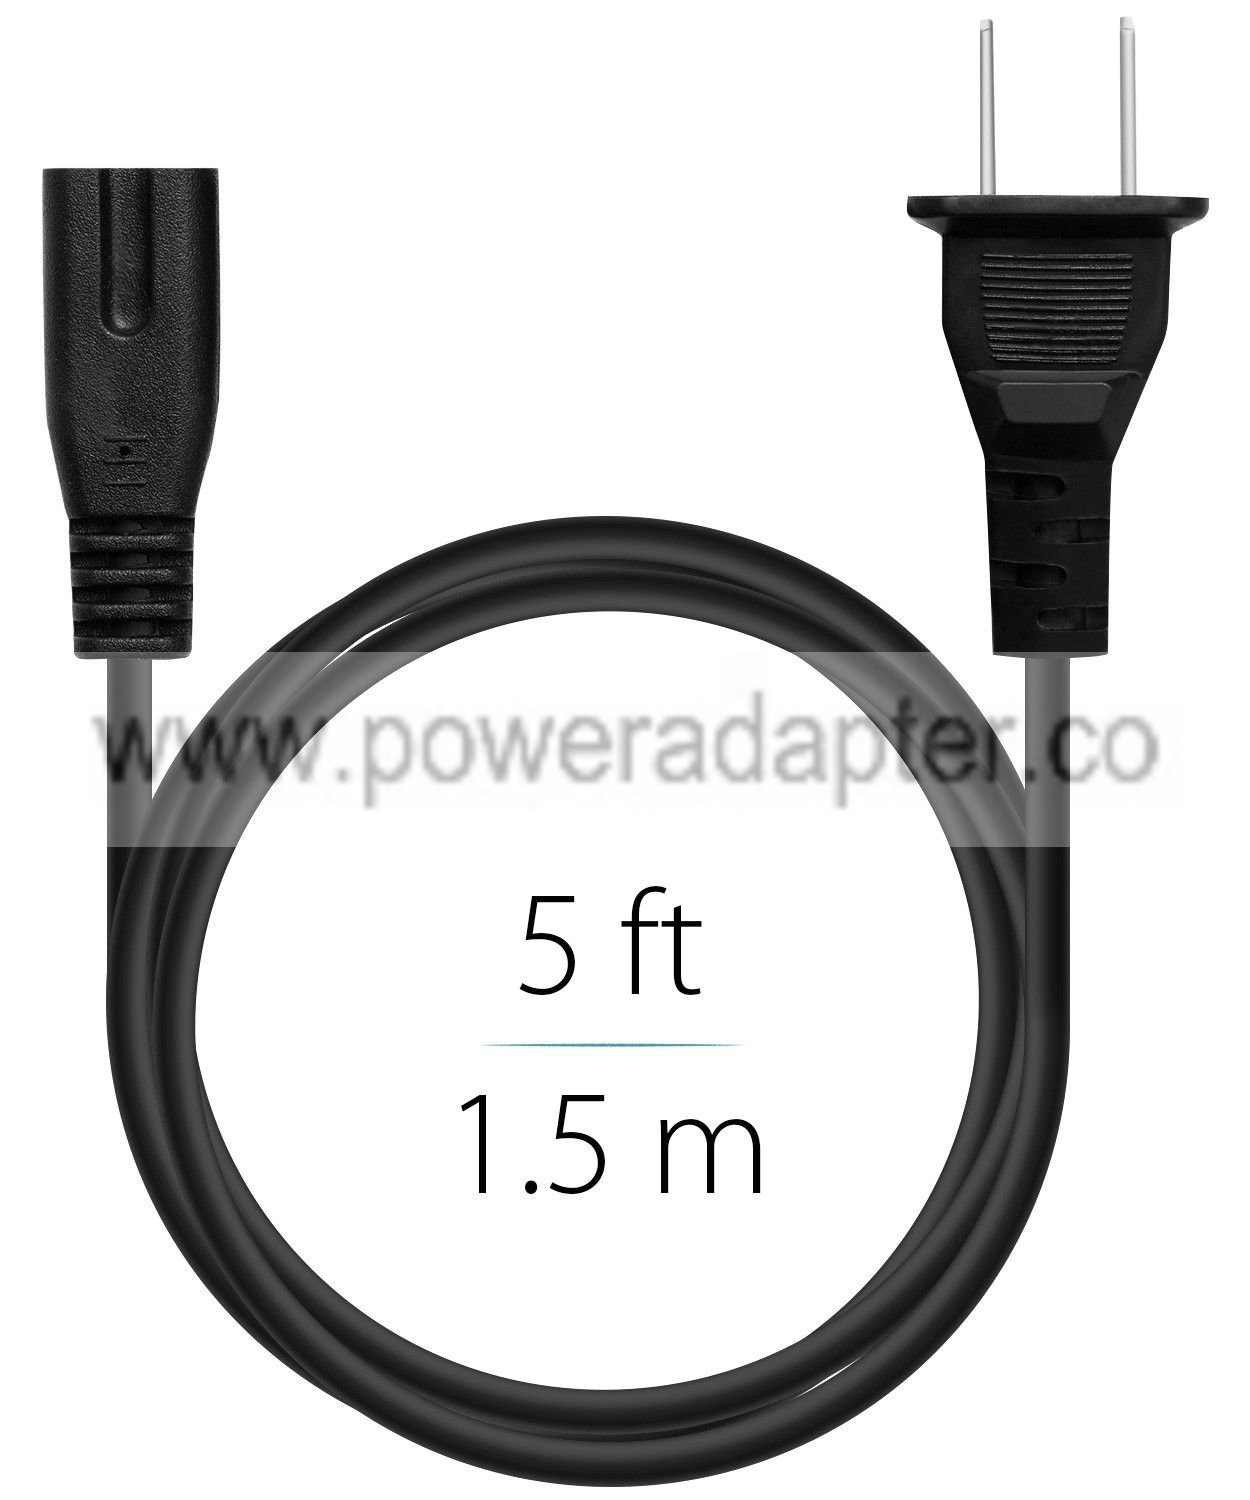 2 Prong Power Supply Cord 1.5m PS4 Xbox One X S PA-14 5FT Adapter Cable Wall Plug